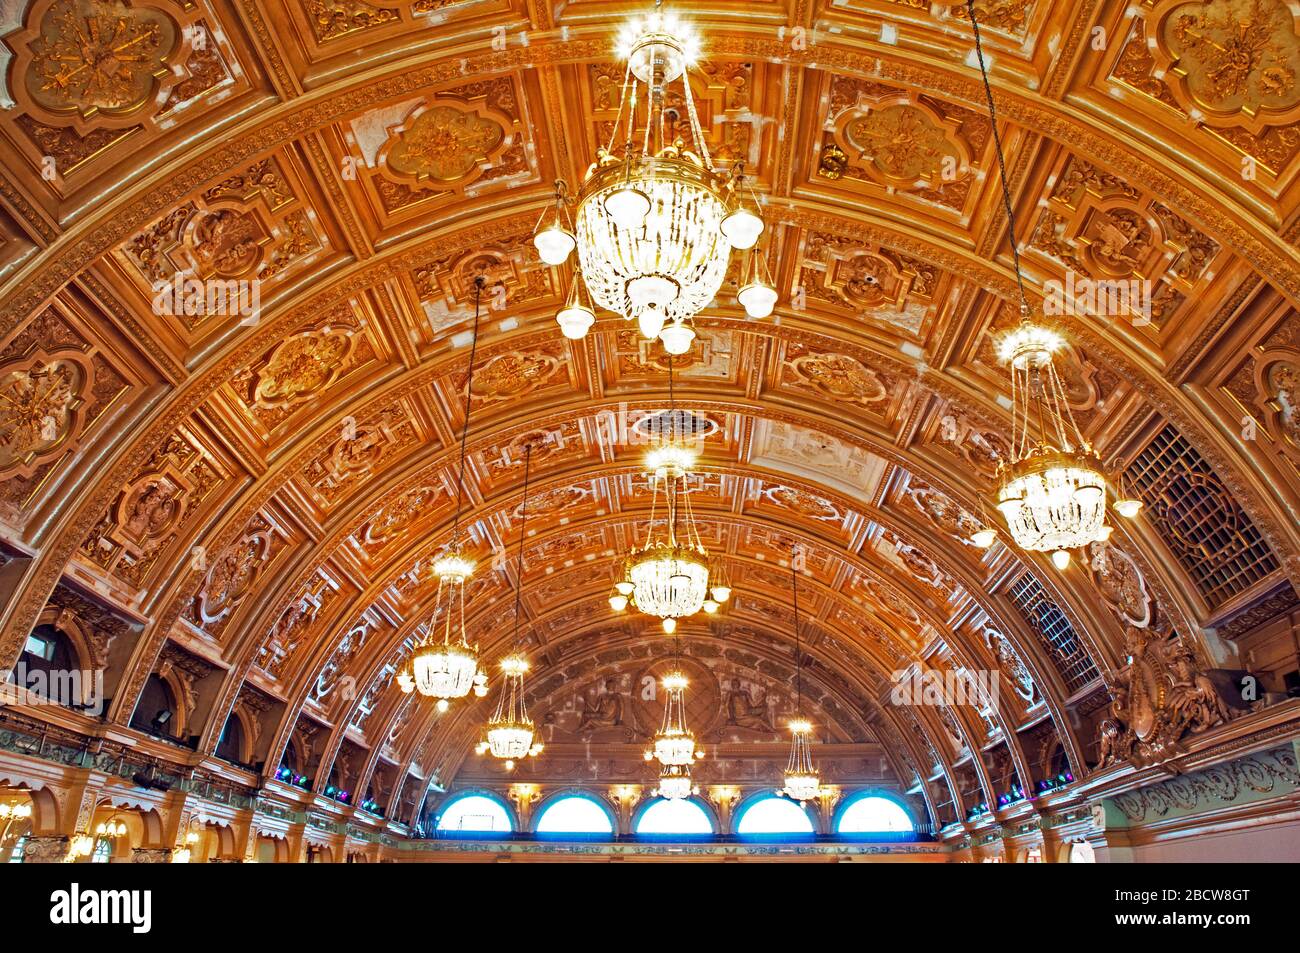 Panels & chandeliers in the top  of the Winter Gardens Empress Ballroom Blackpool Lancashire UK The world renown Blackpool Dance Festival is held here Stock Photo